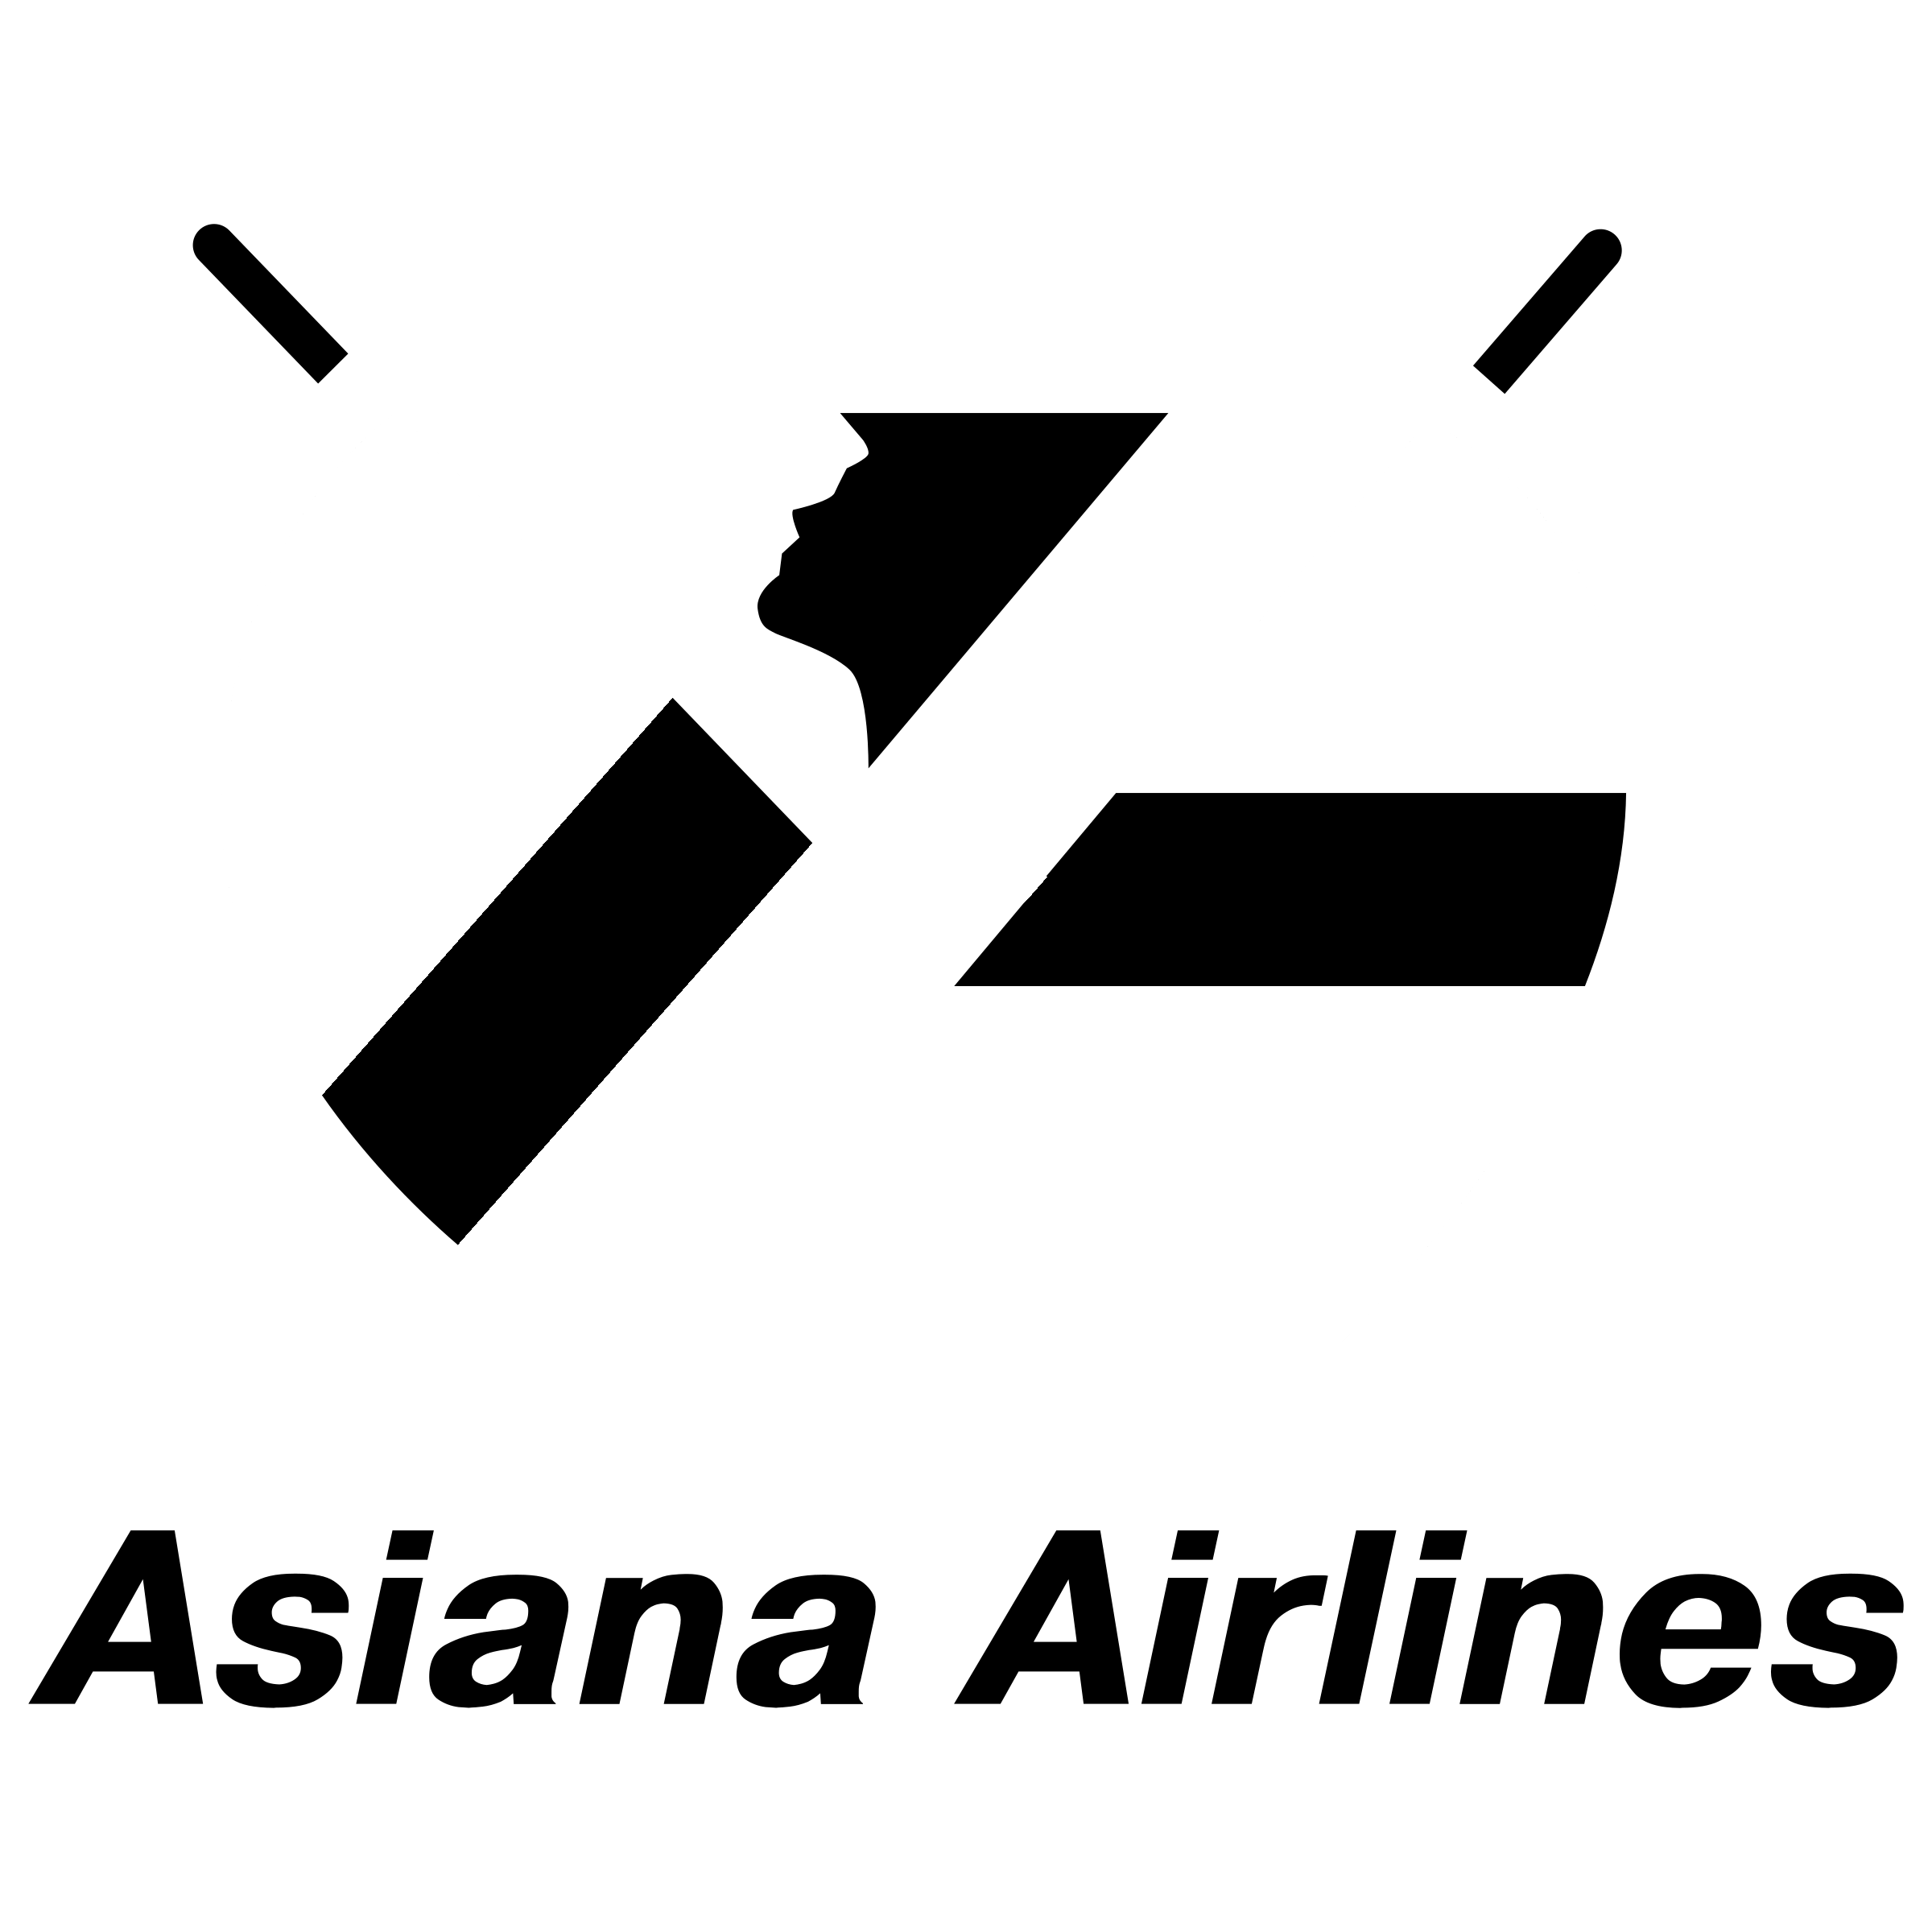 Asiana Logo - Asiana Airlines 01 Logo PNG Transparent & SVG Vector - Freebie Supply